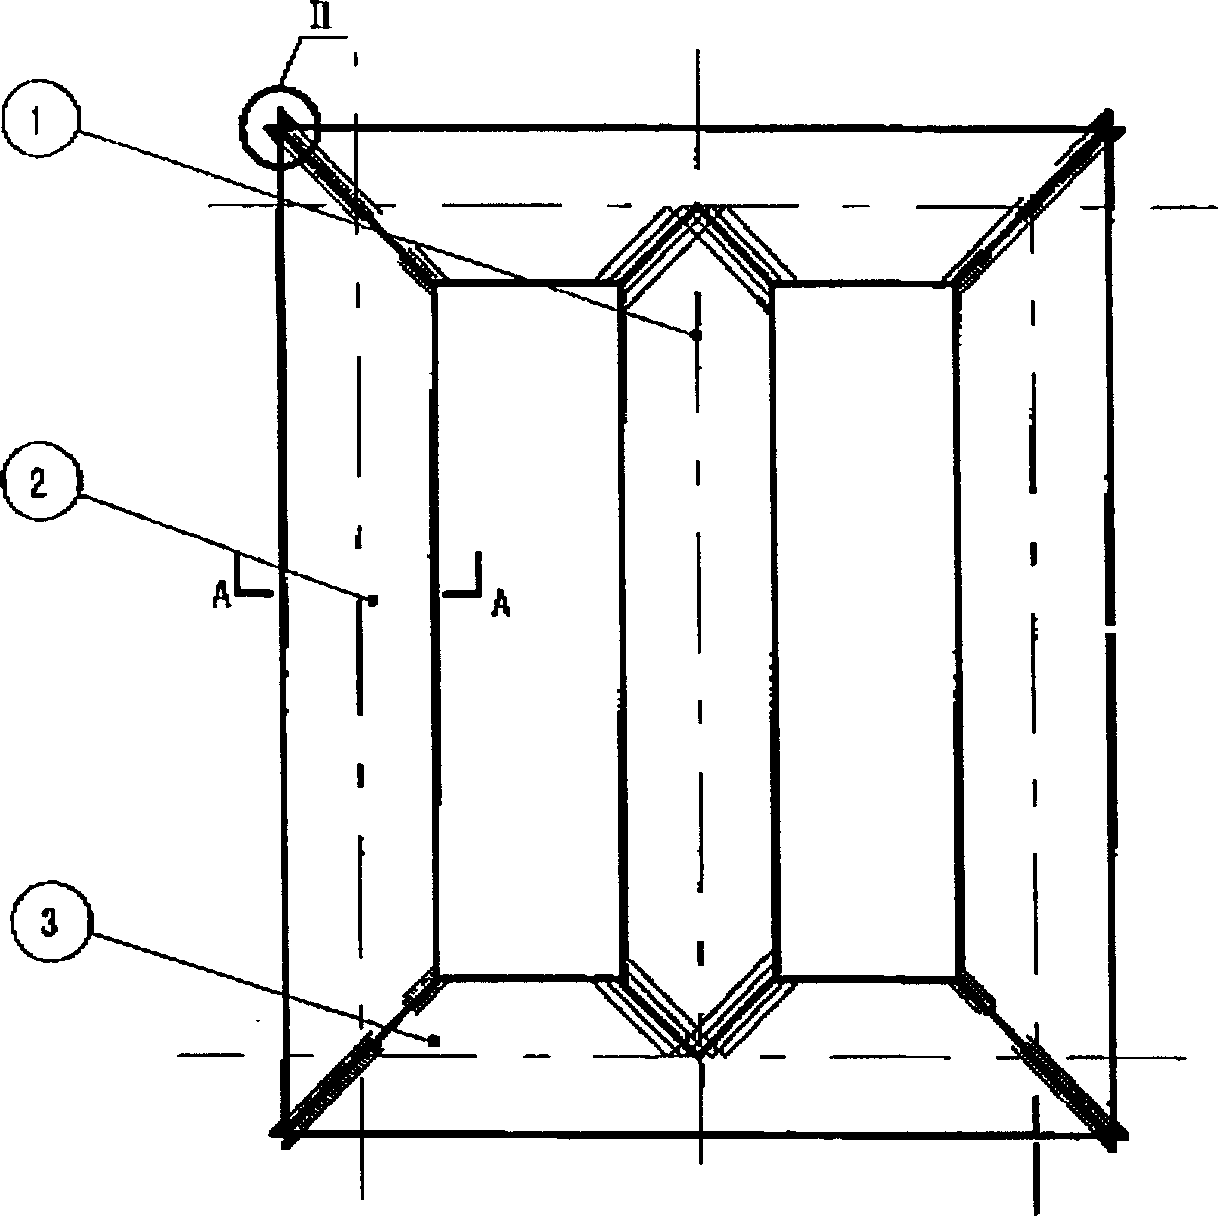 Process for laminating the iron core of distribution transformer